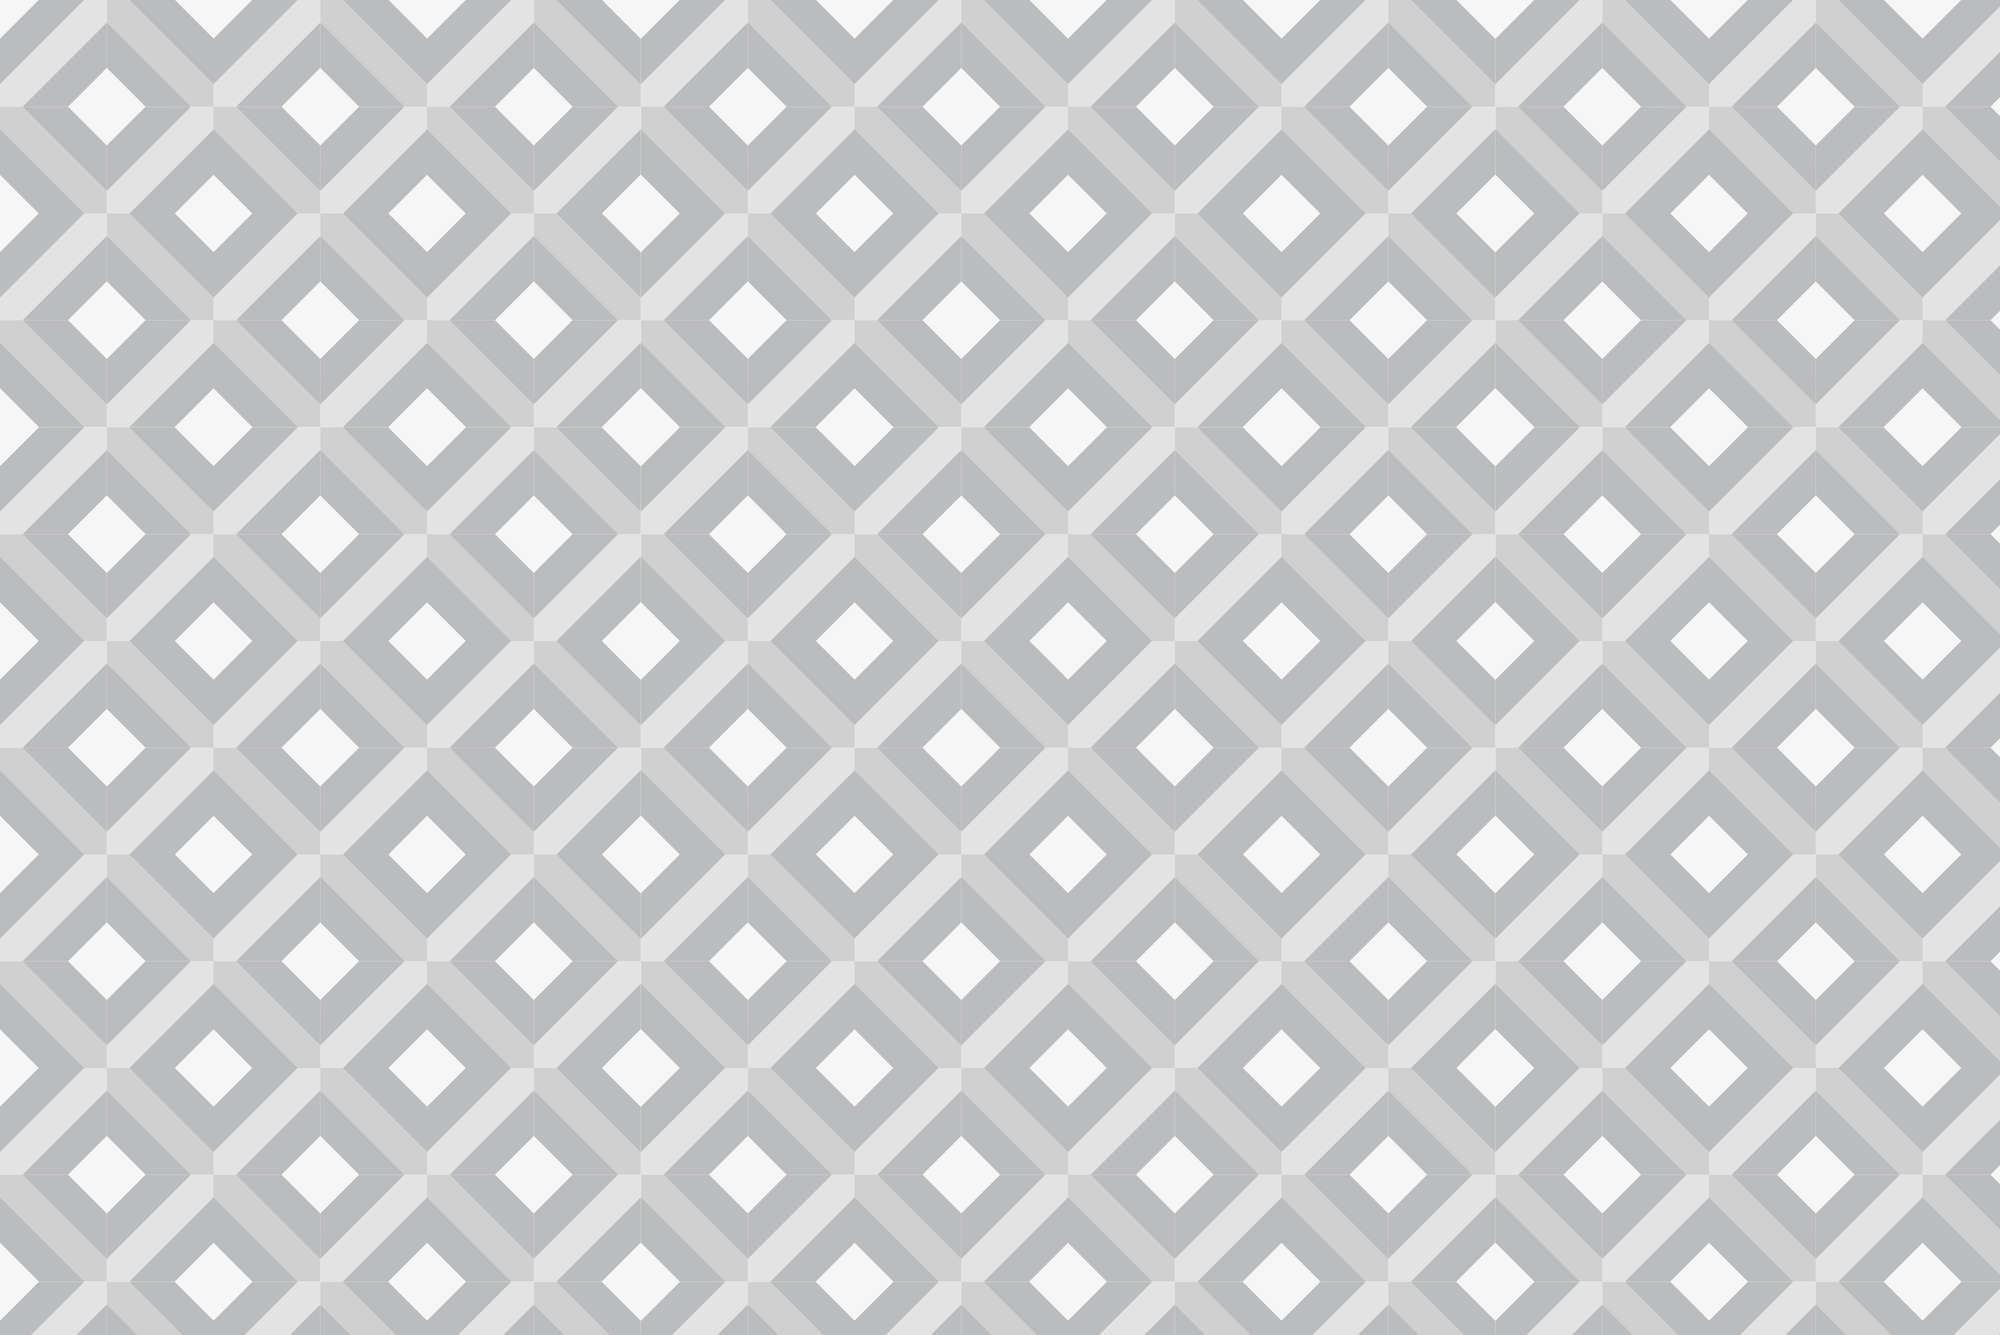             Design wall mural box motif with small squares grey on matt smooth non-woven
        